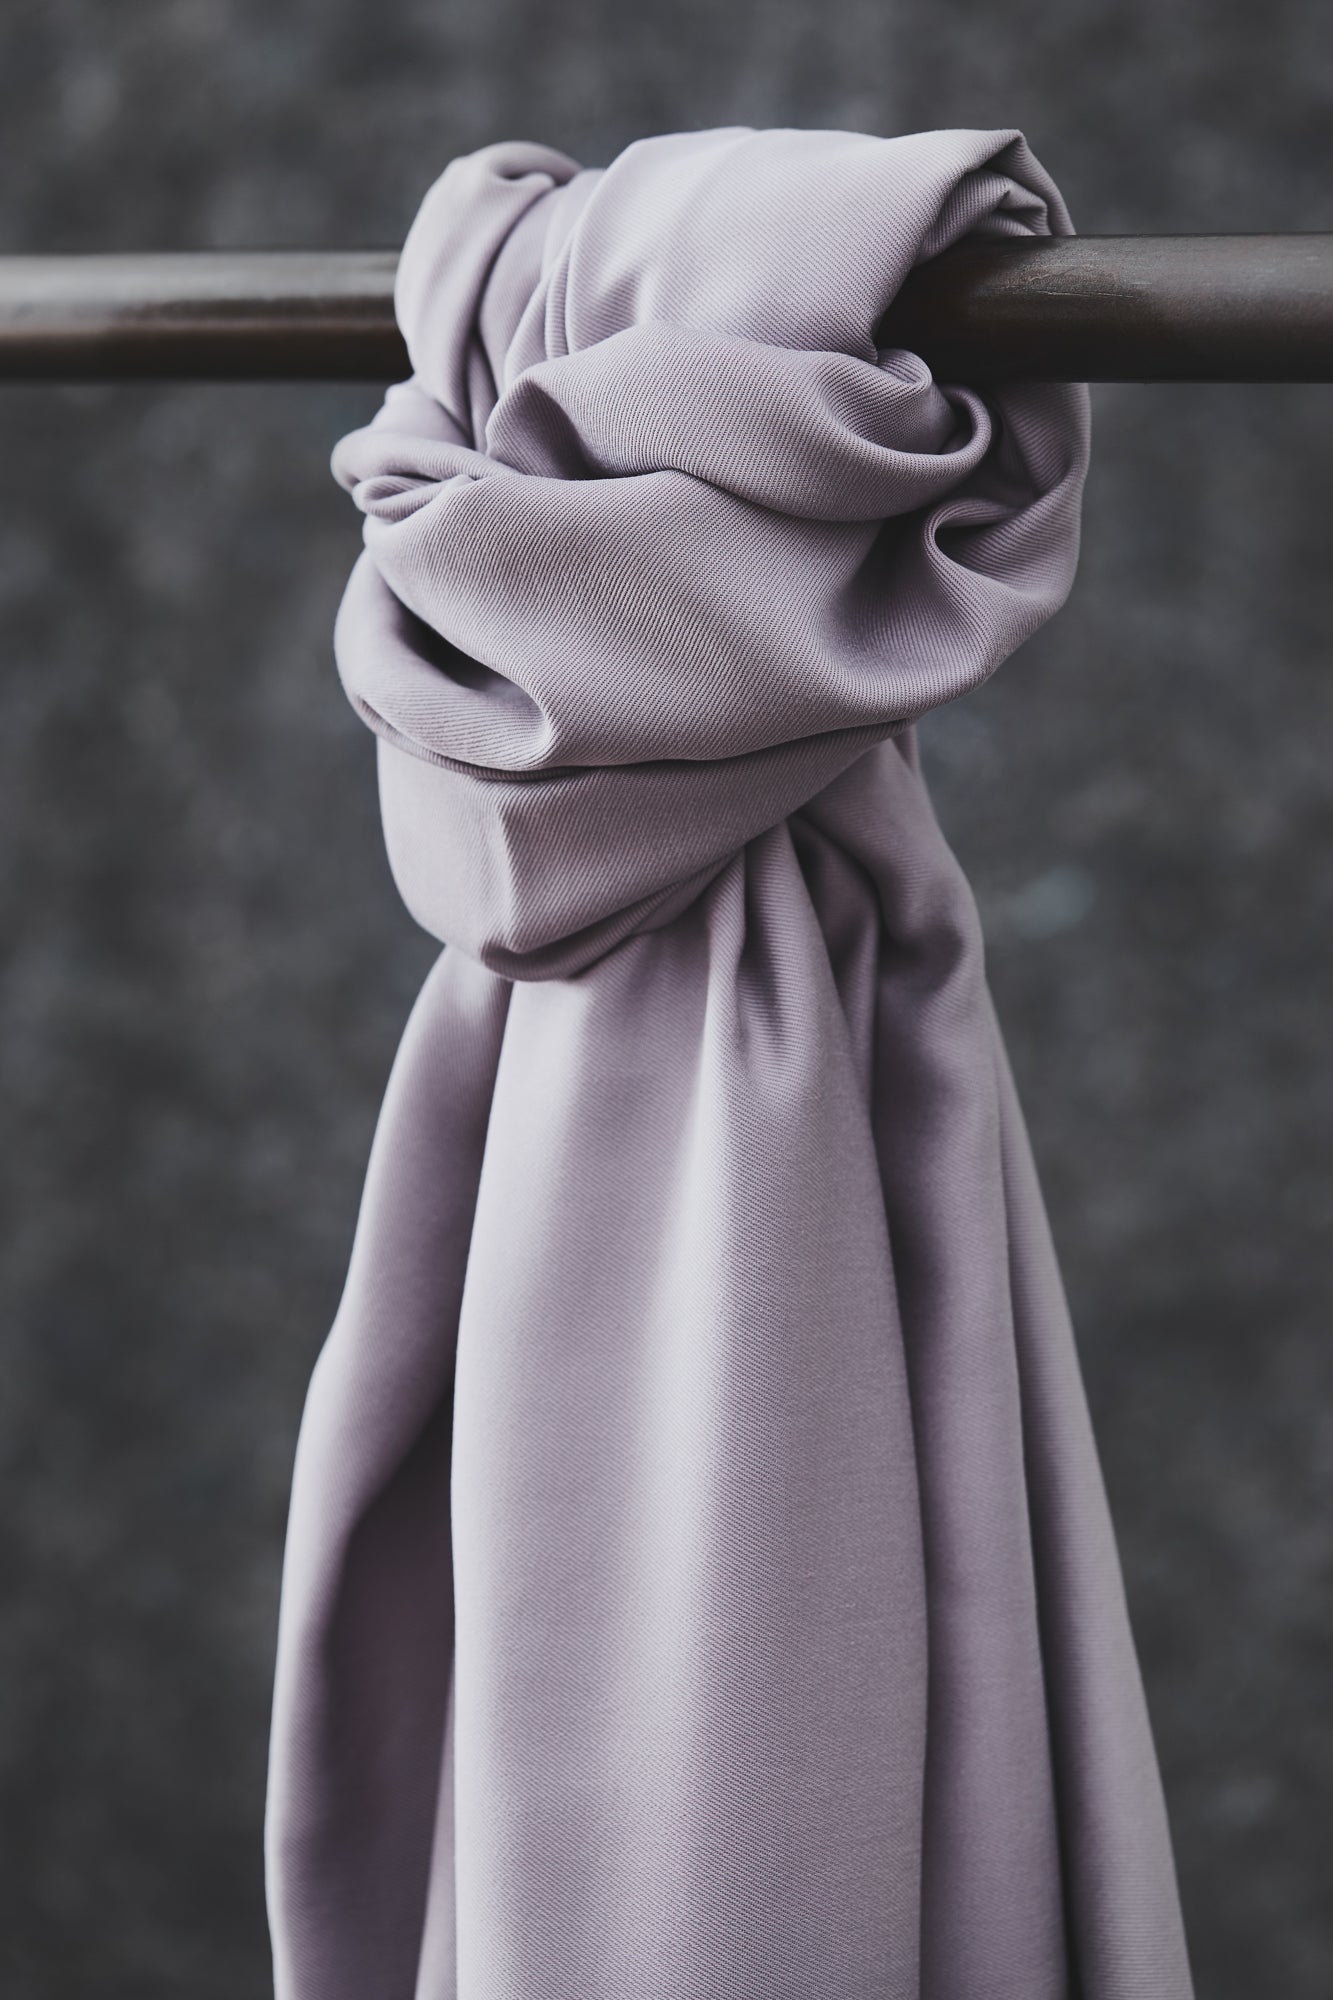 Smooth drape twill tencel sewing fabric knotted over clothes rail, in colour purple haze (lilac)